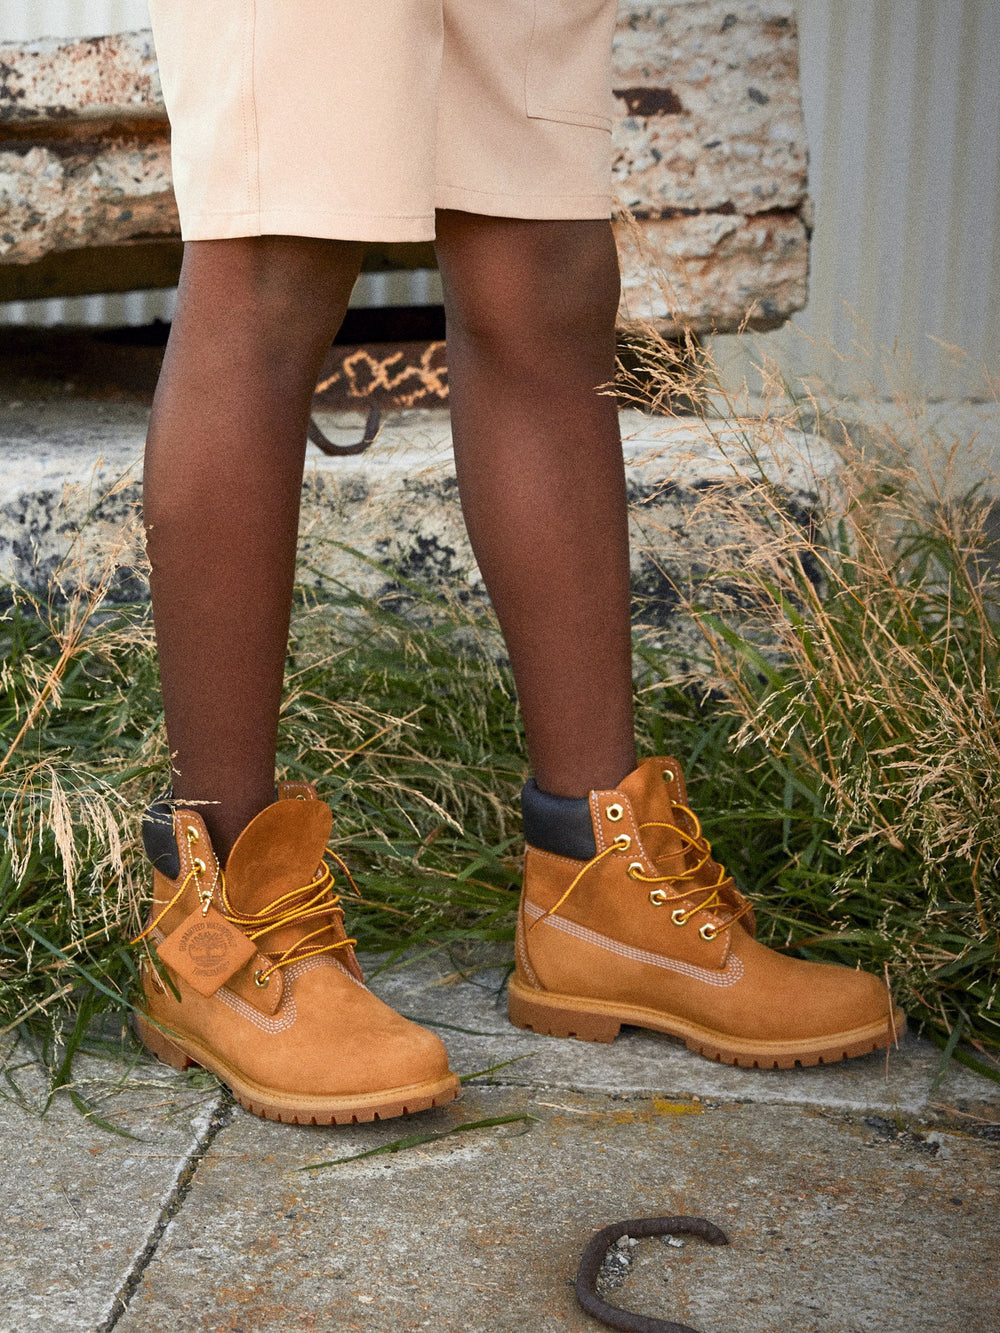 KIDS TIMBERLAND TODDLER 6" PREM WP BOOT - WHEAT NBCK - CLEARANCE